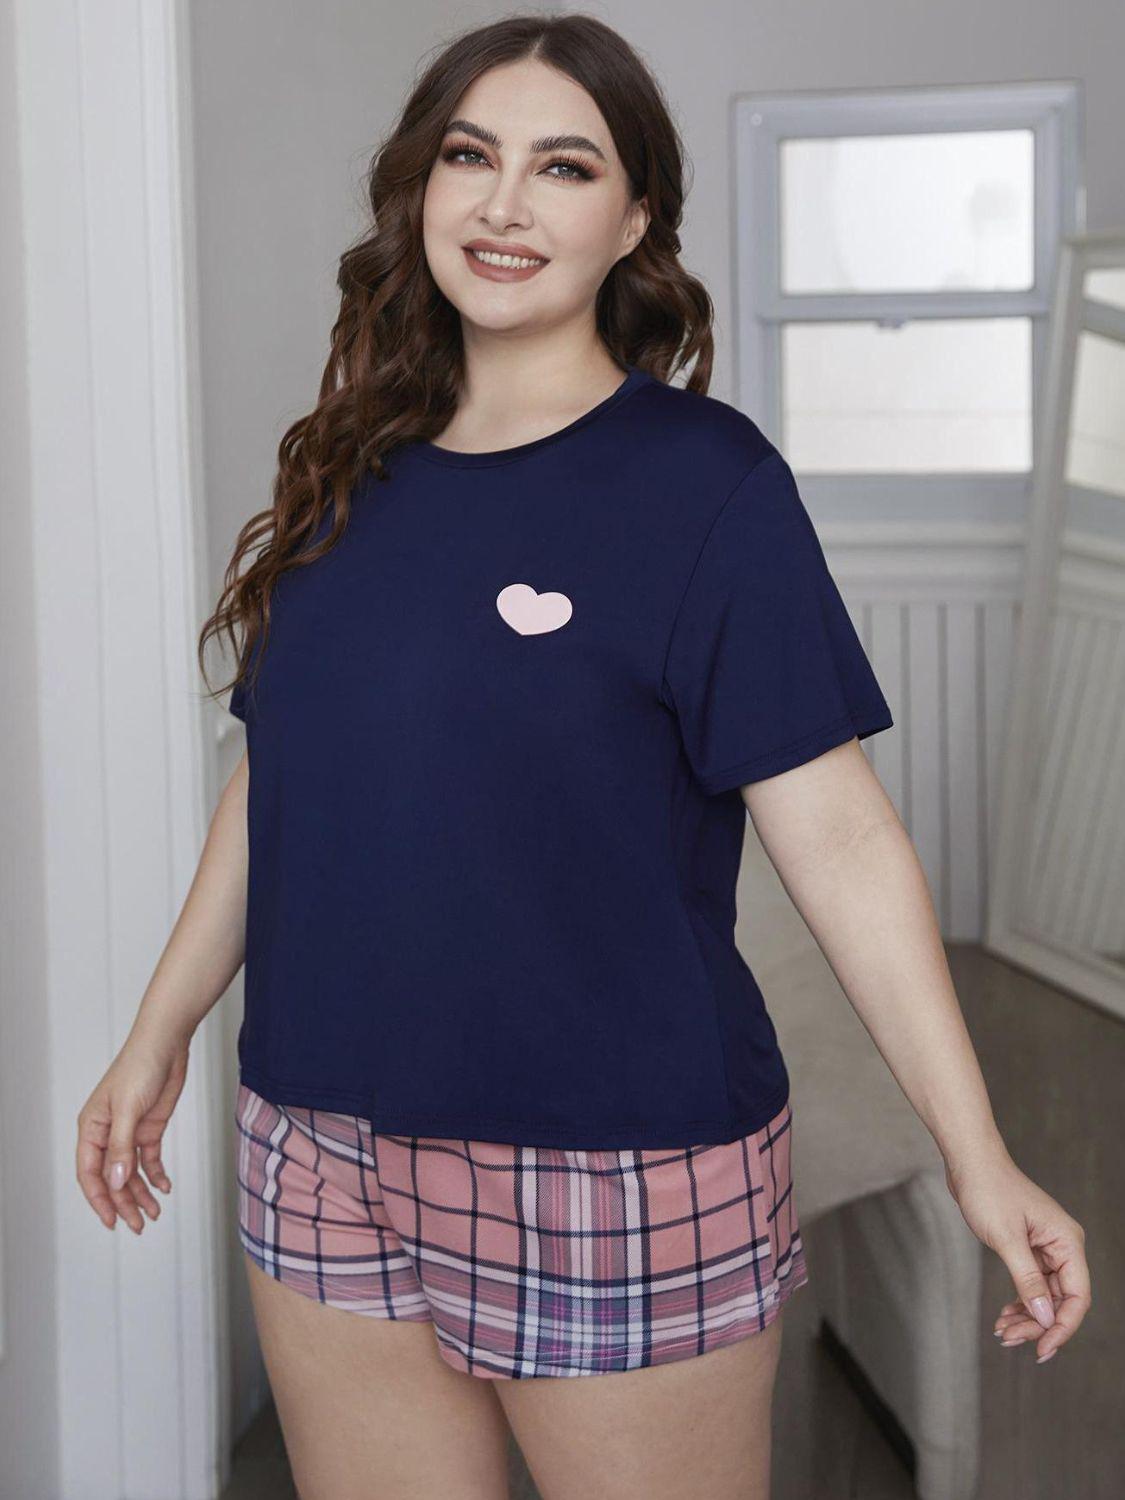 Plus Size Heart Graphic Top and Plaid Shorts Loungewear Set BLUE ZONE PLANET